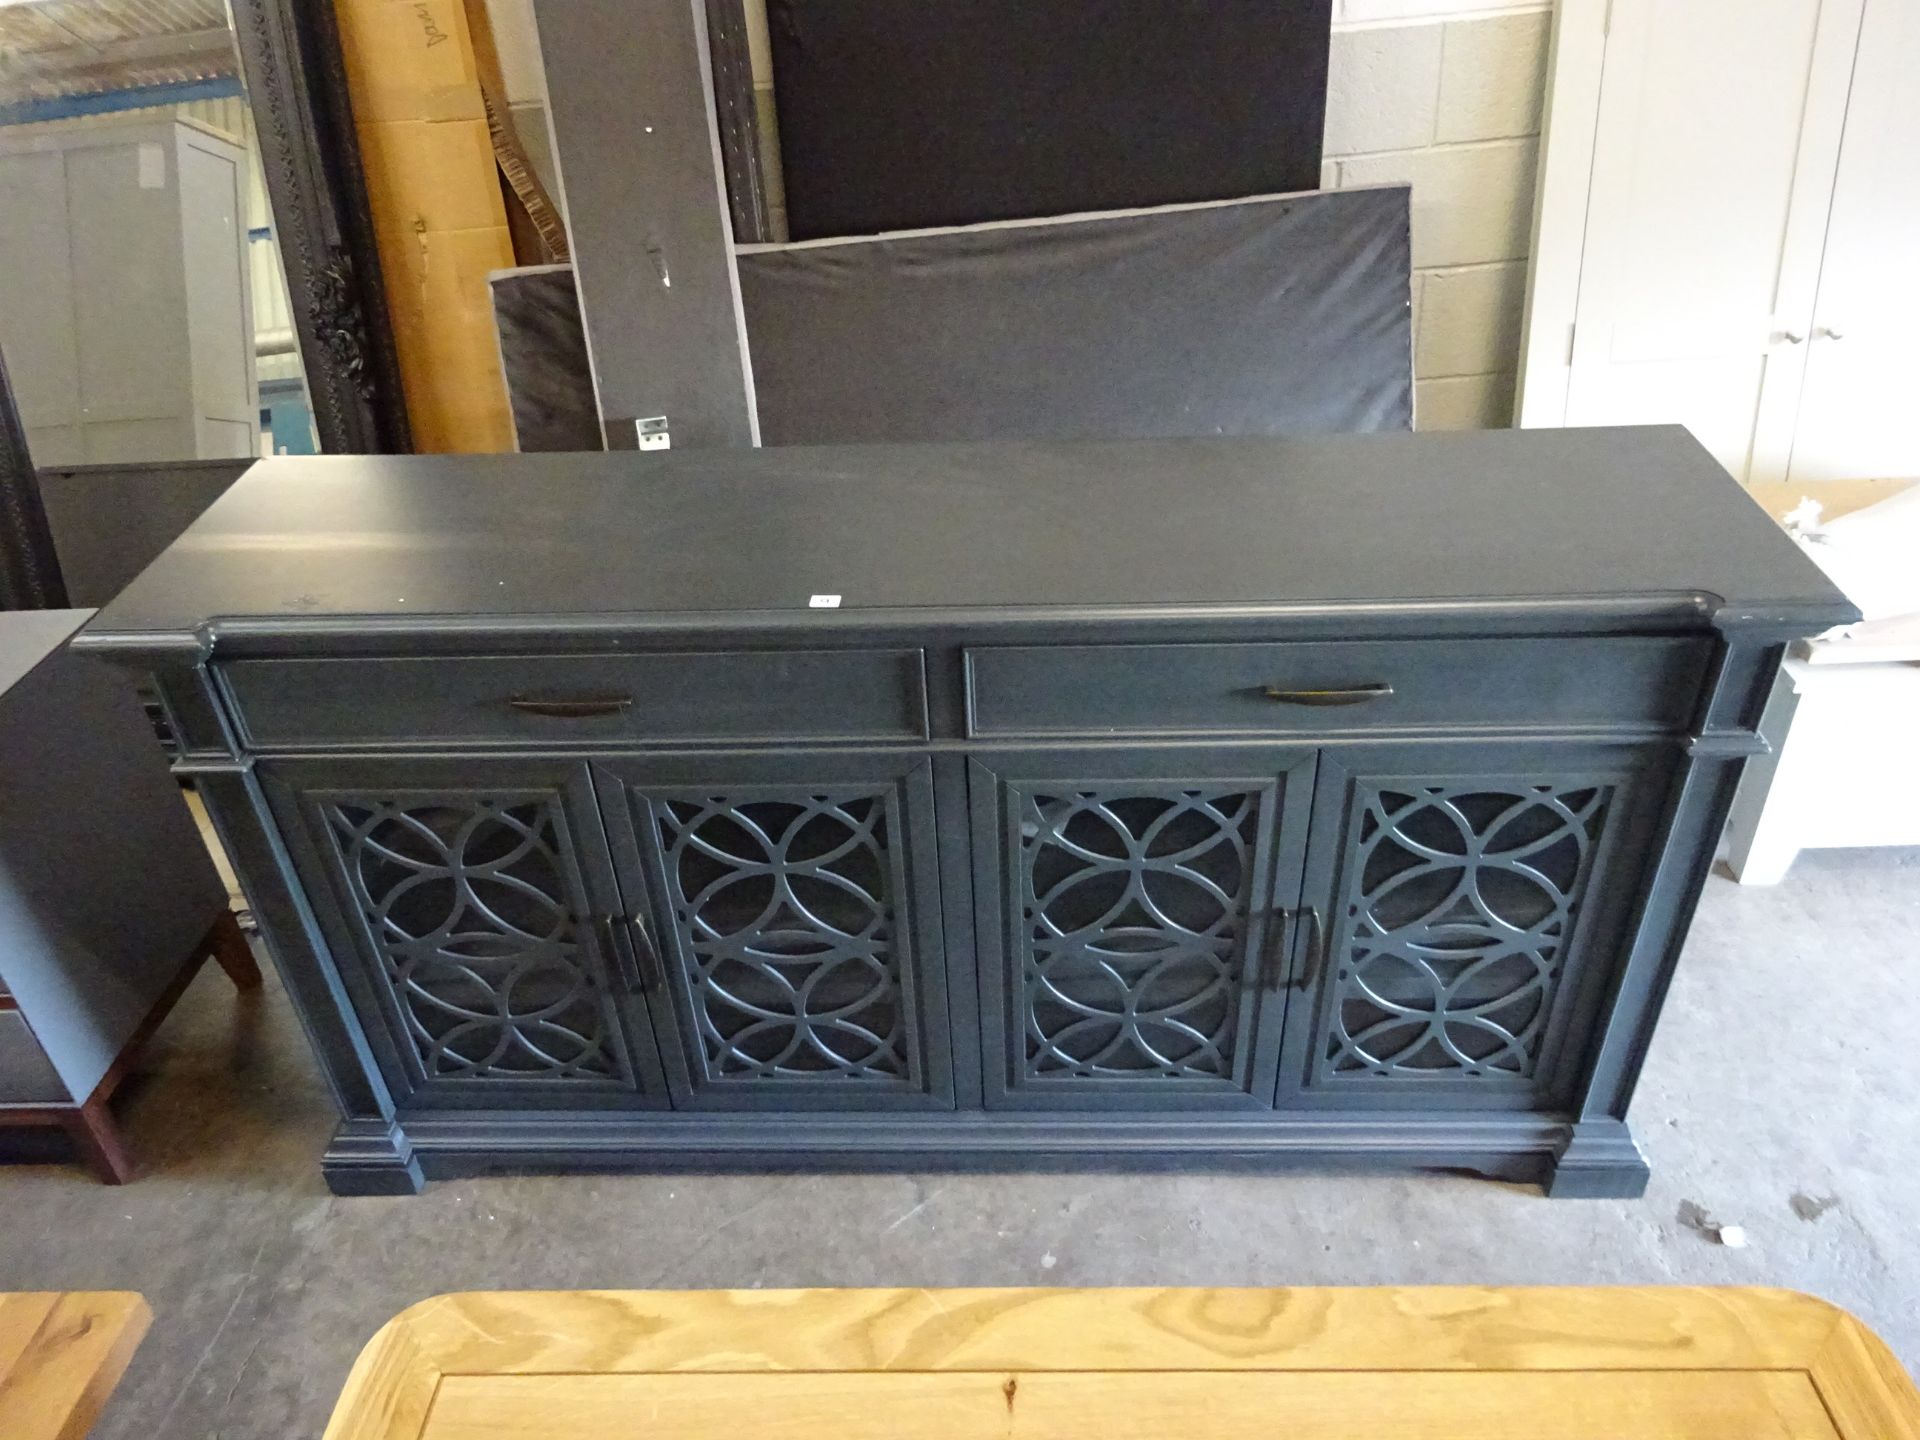 RRP £799 - Twin Star Luna 74" Accent Console Unit H 94.6 x W 188 x D 45.7 cm - FEW MARKS AND CRACK - Image 3 of 4